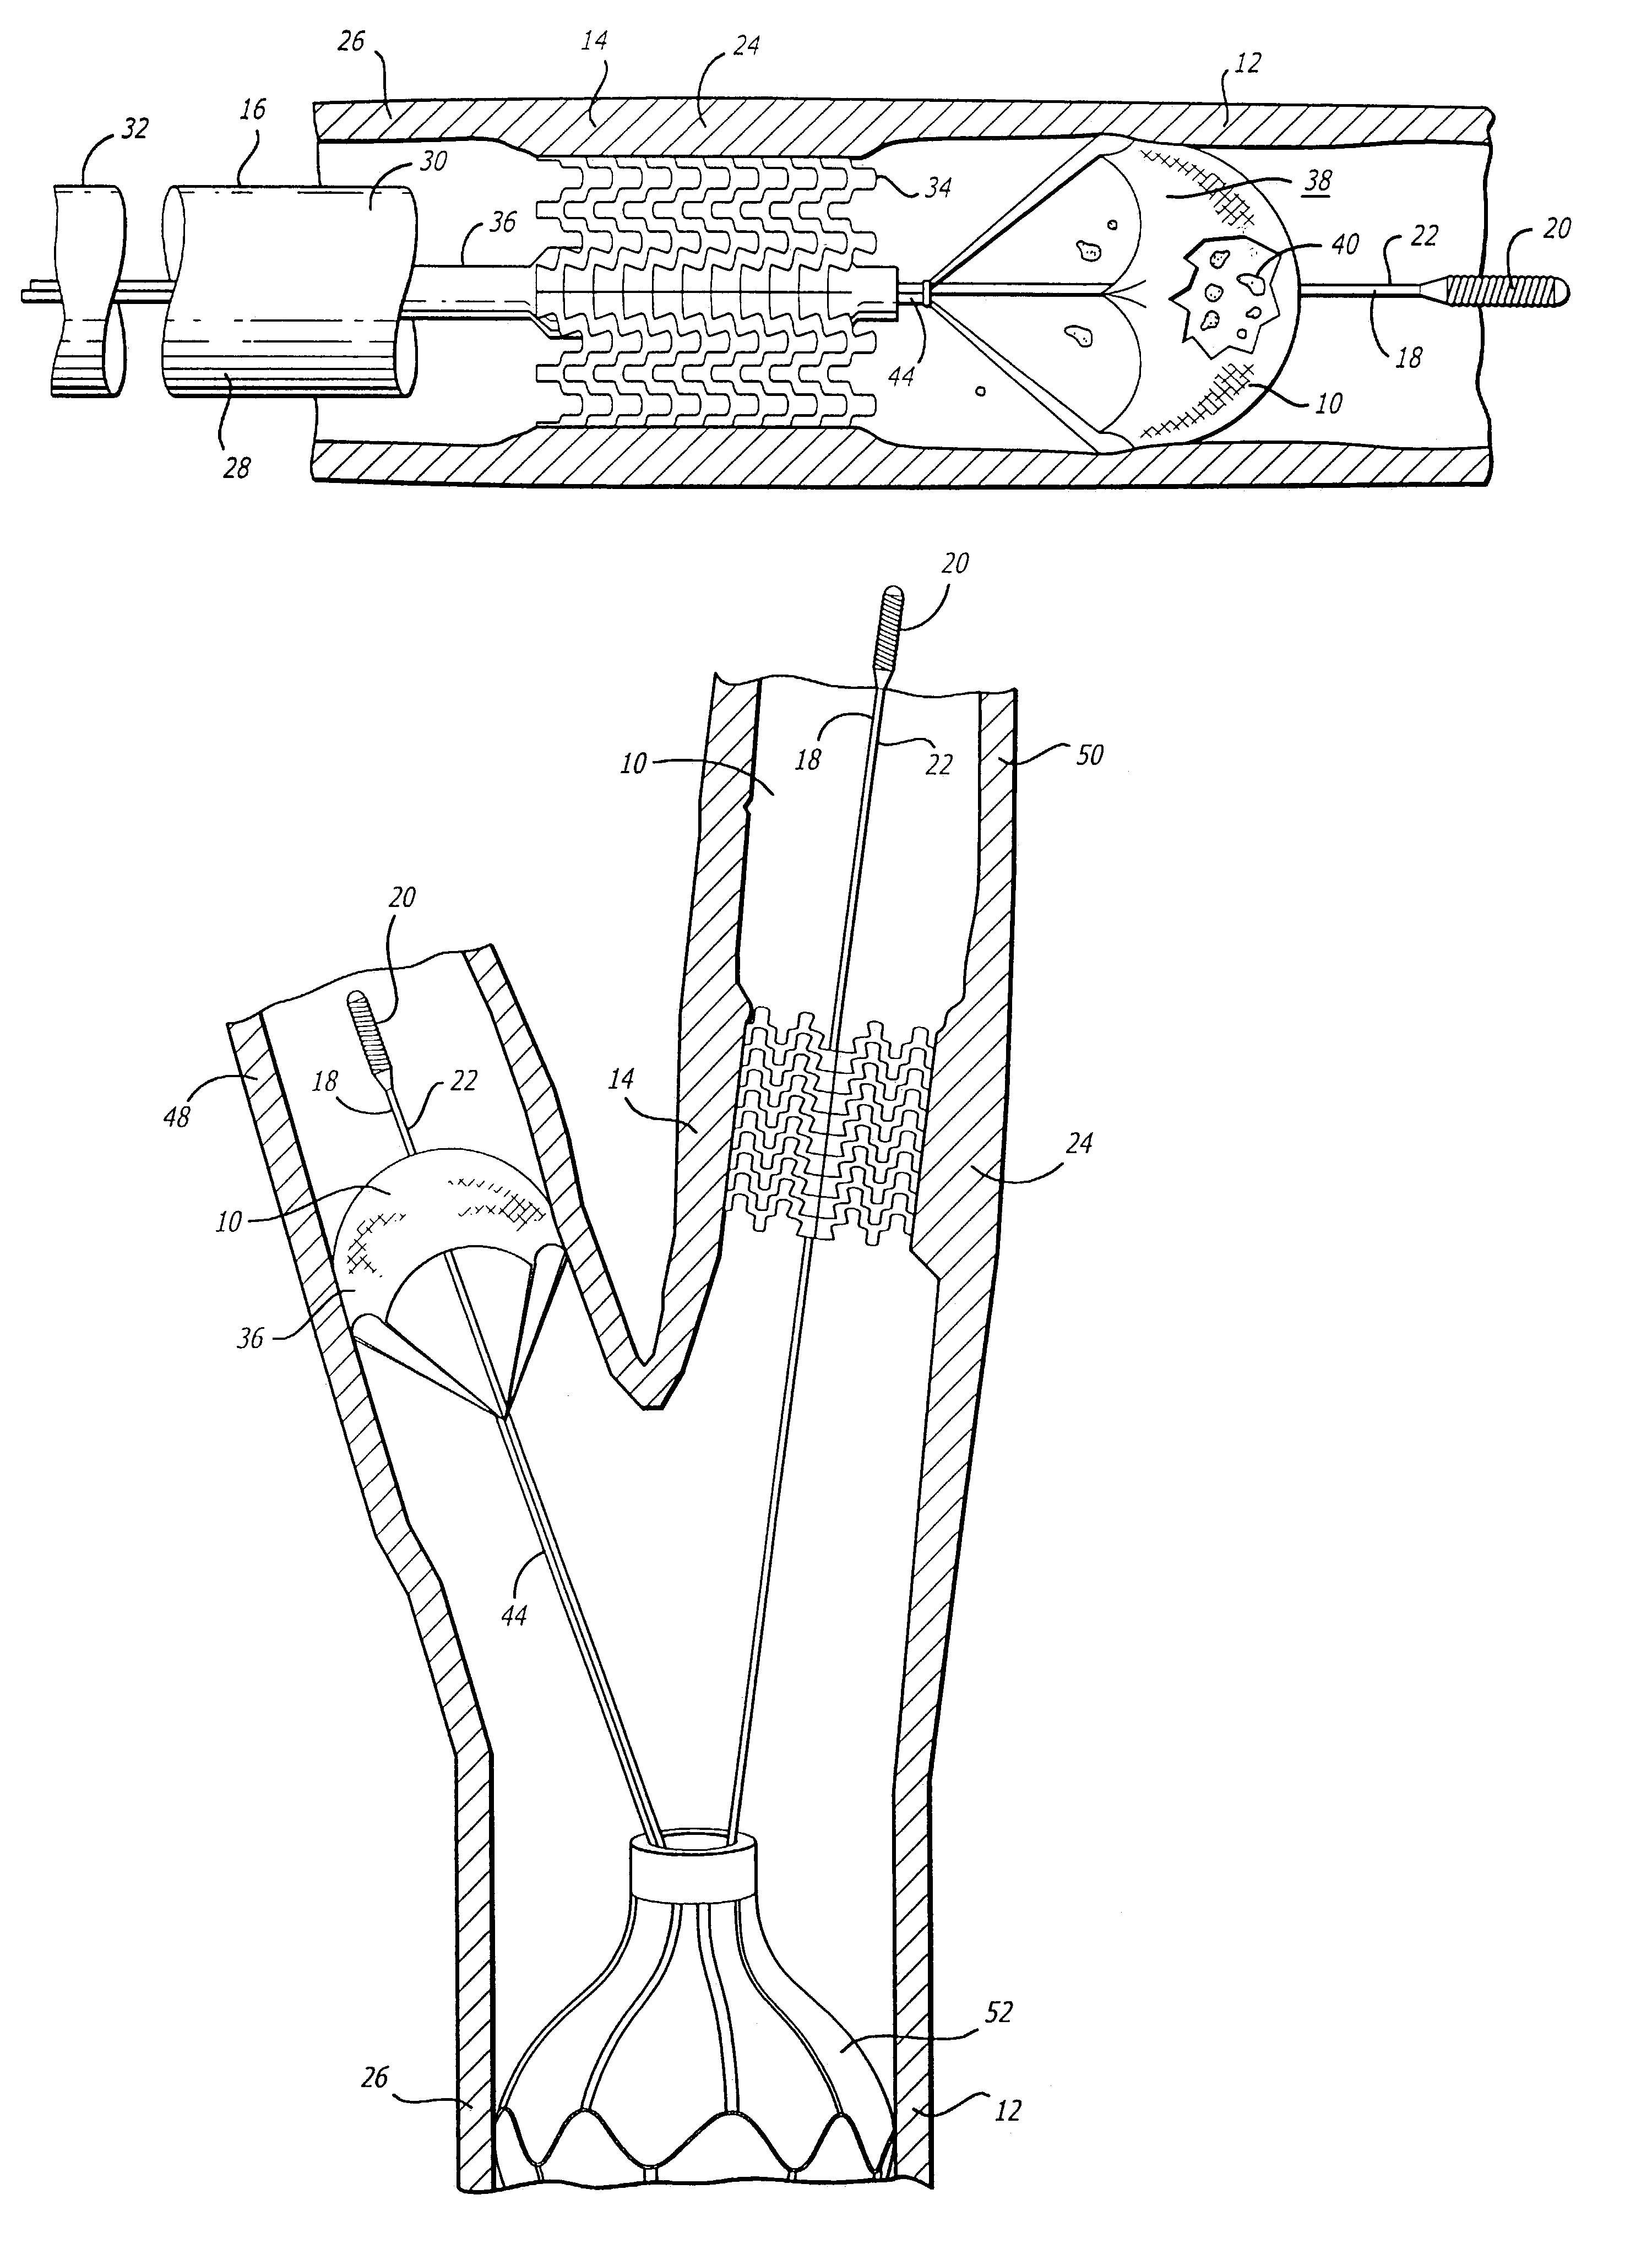 Vessel occlusion device for embolic protection system